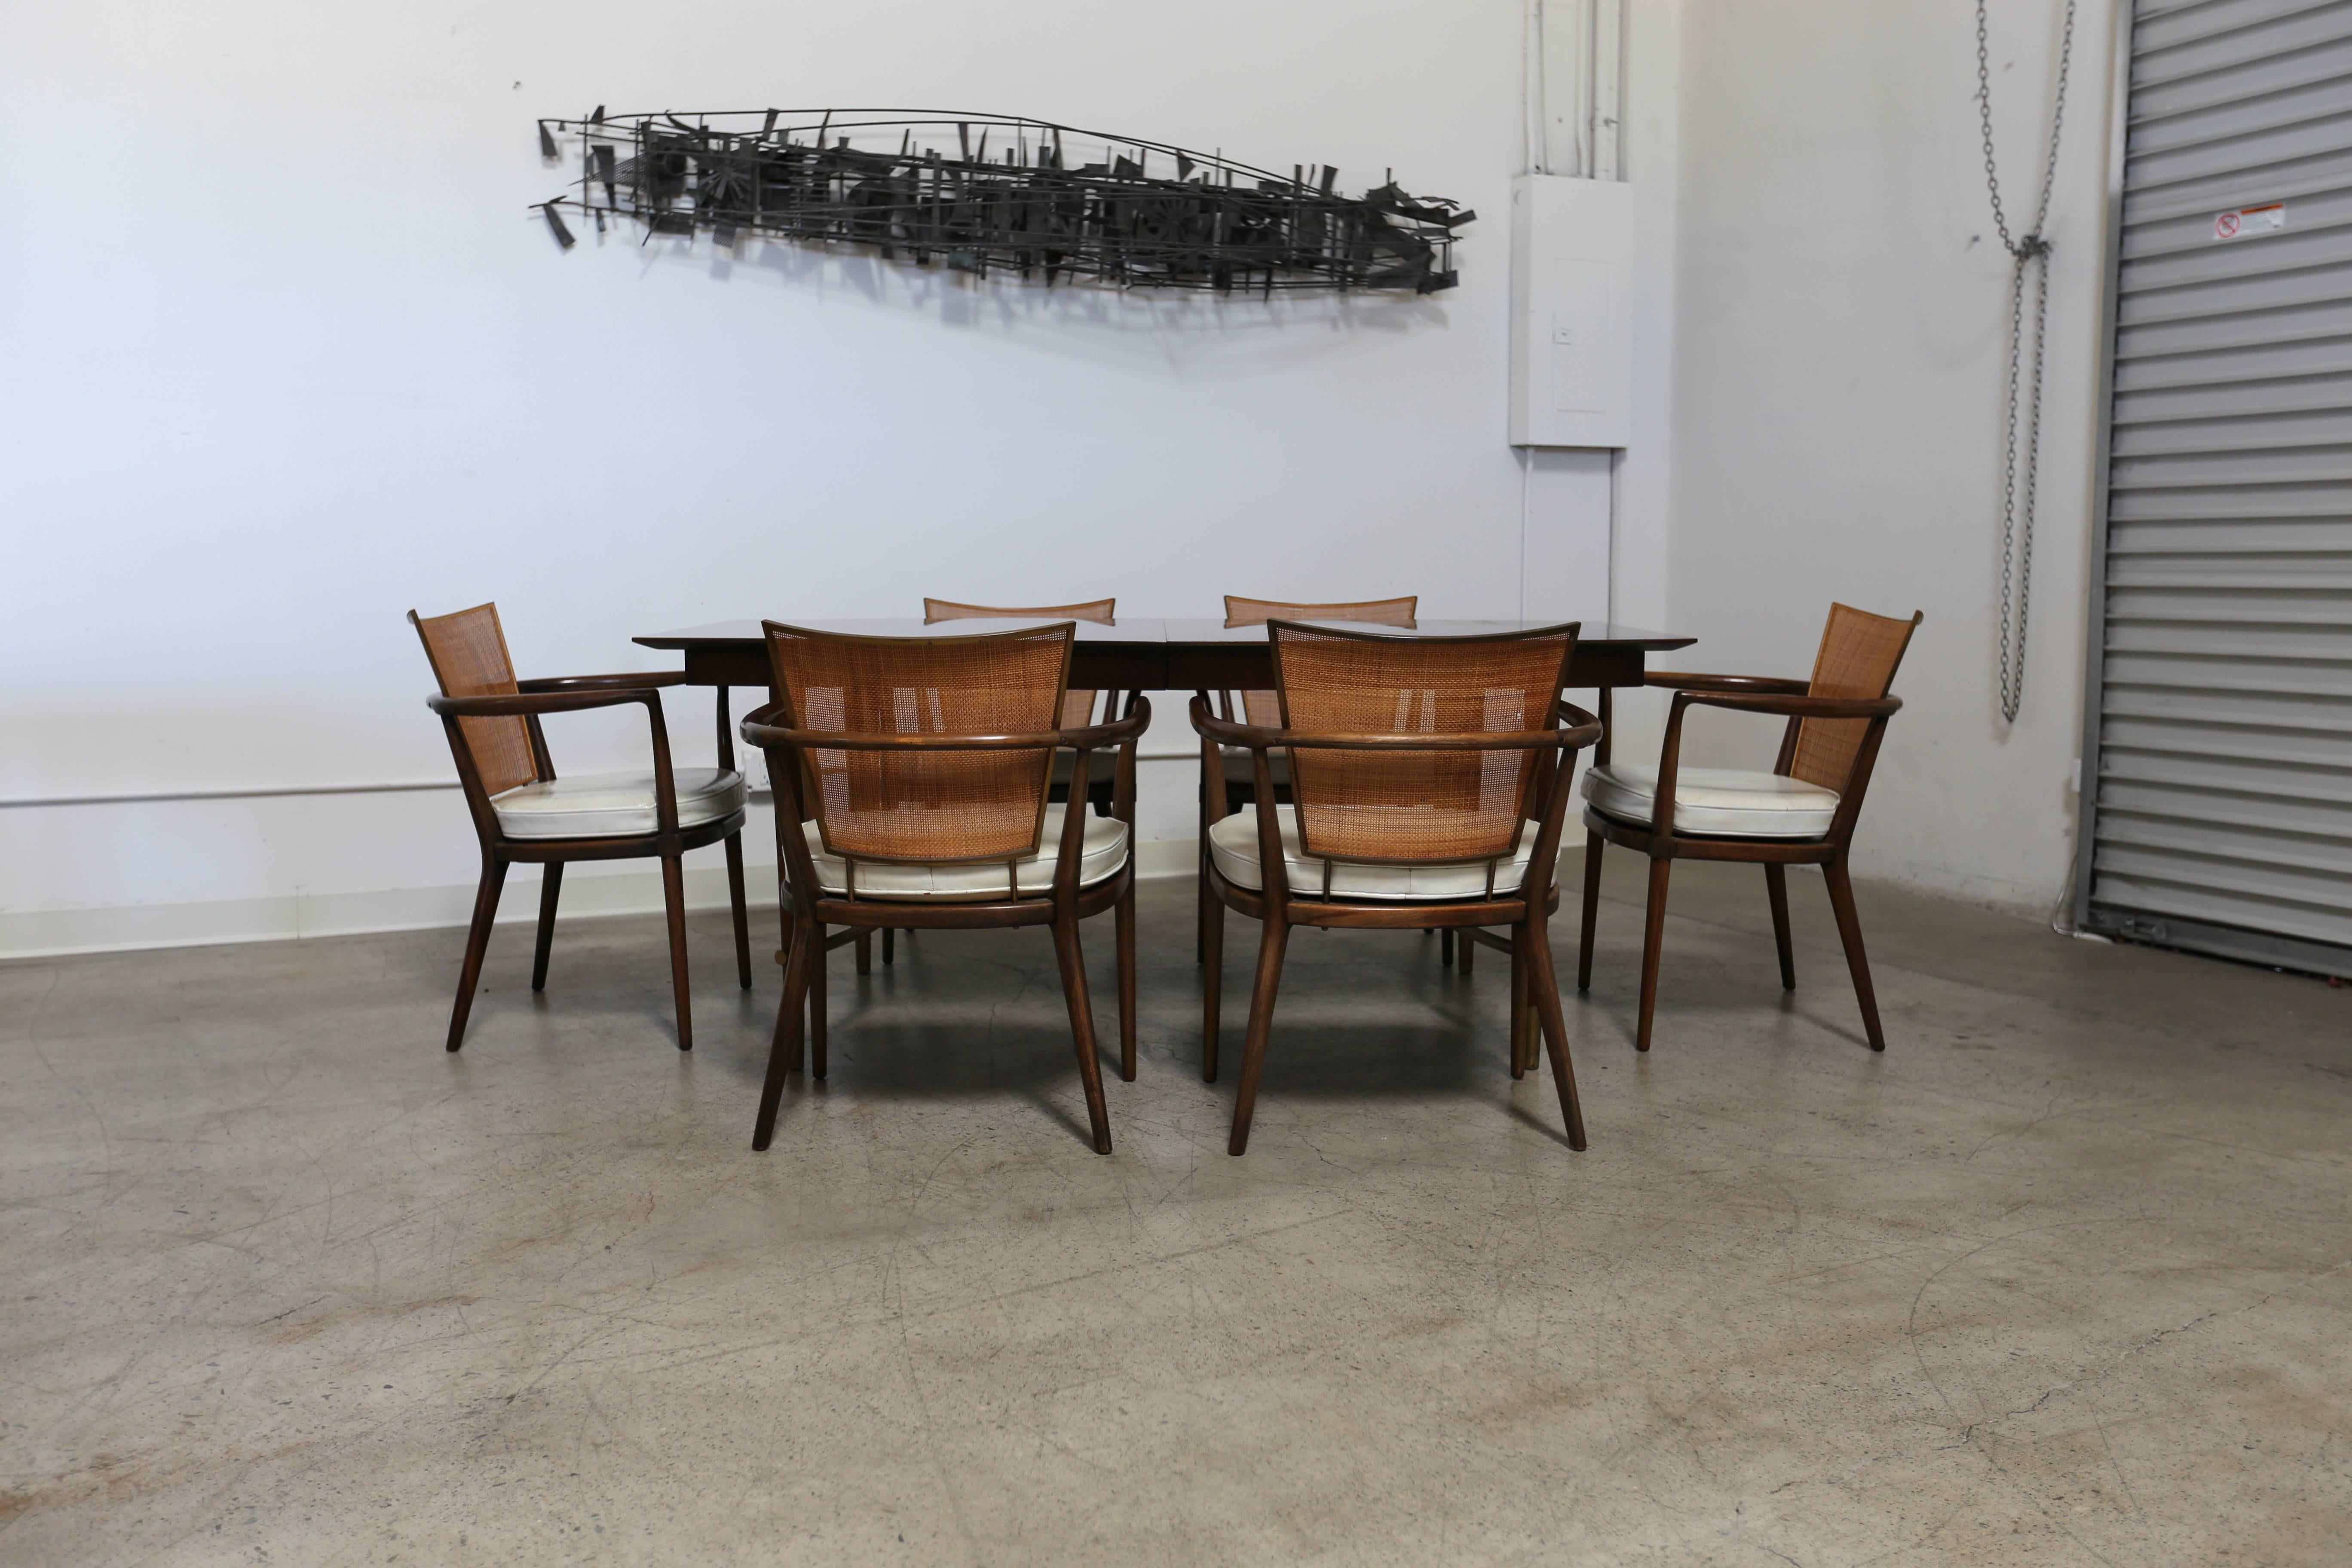 20th Century Dining Set by Bert England for Johnson Furniture Company